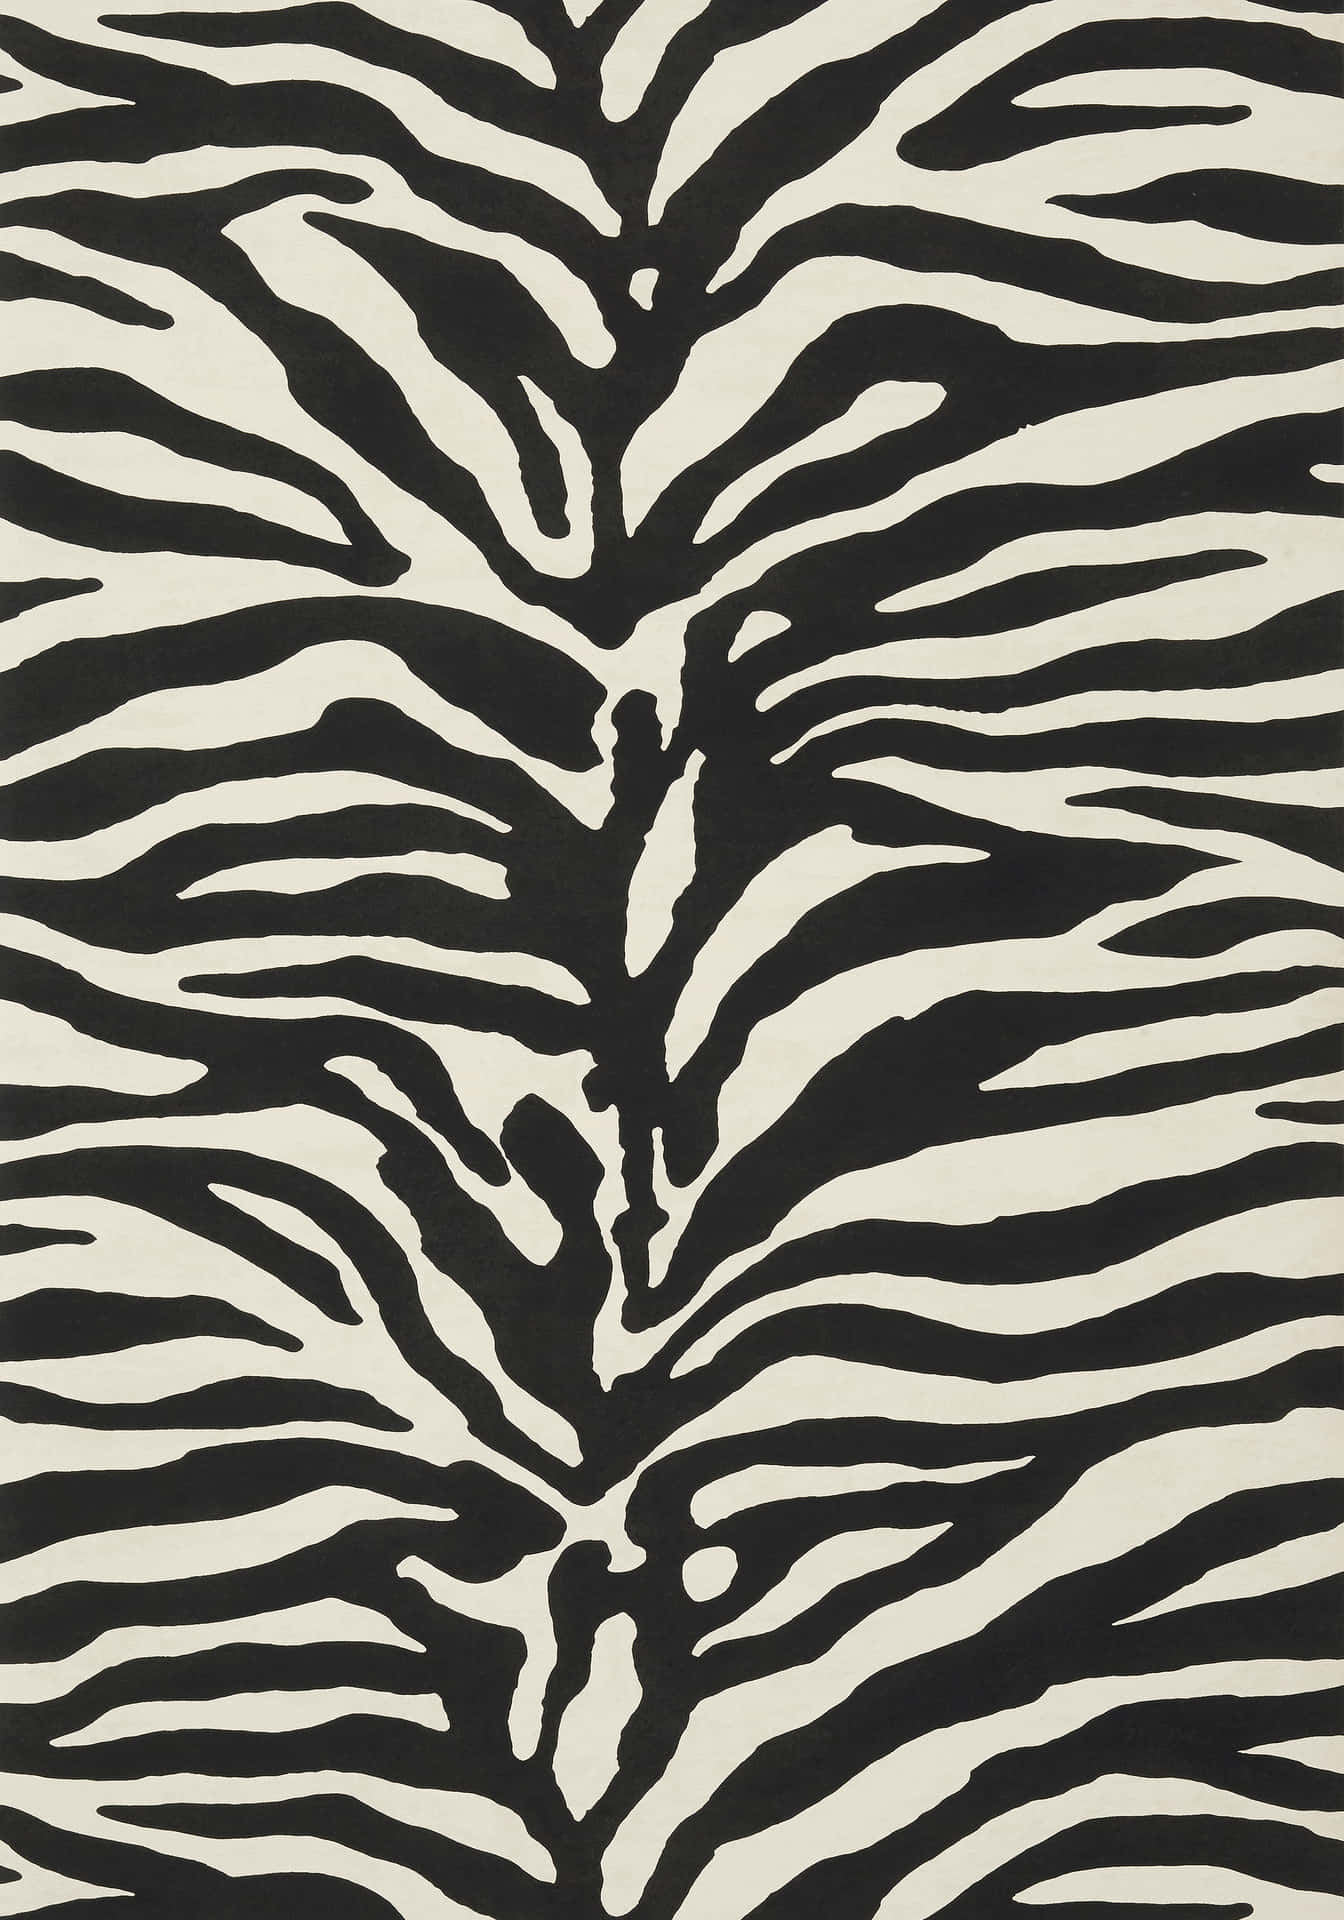 Download Black And White Animal Print Wallpaper | Wallpapers.com